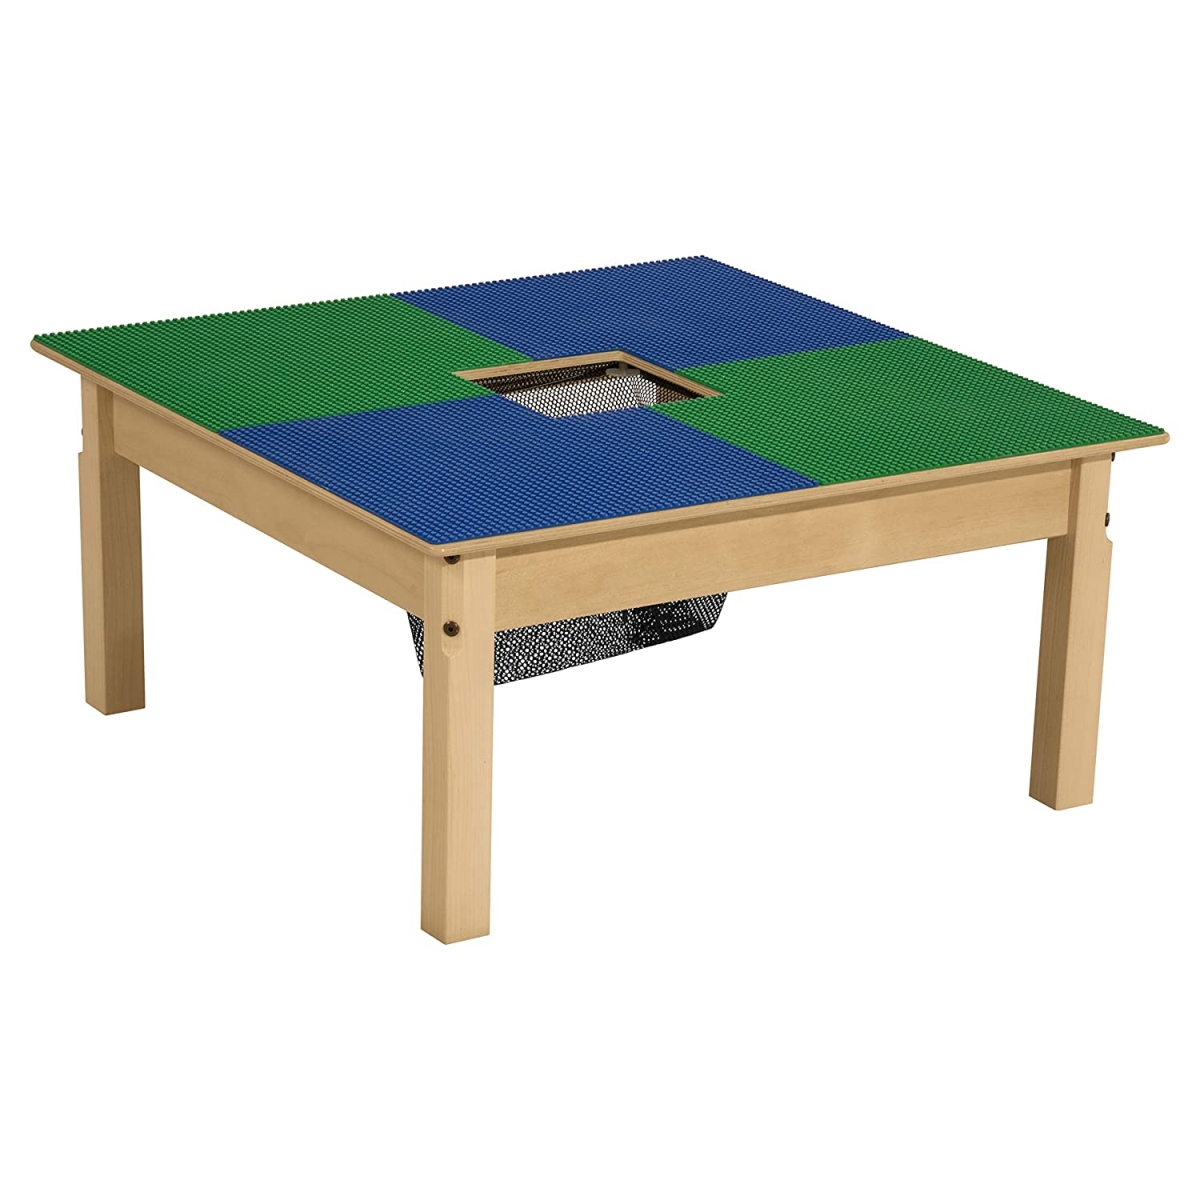 Tp3131sgn24-bg 24 In. Lego Compatible Table With Legs, Blue & Green - Square